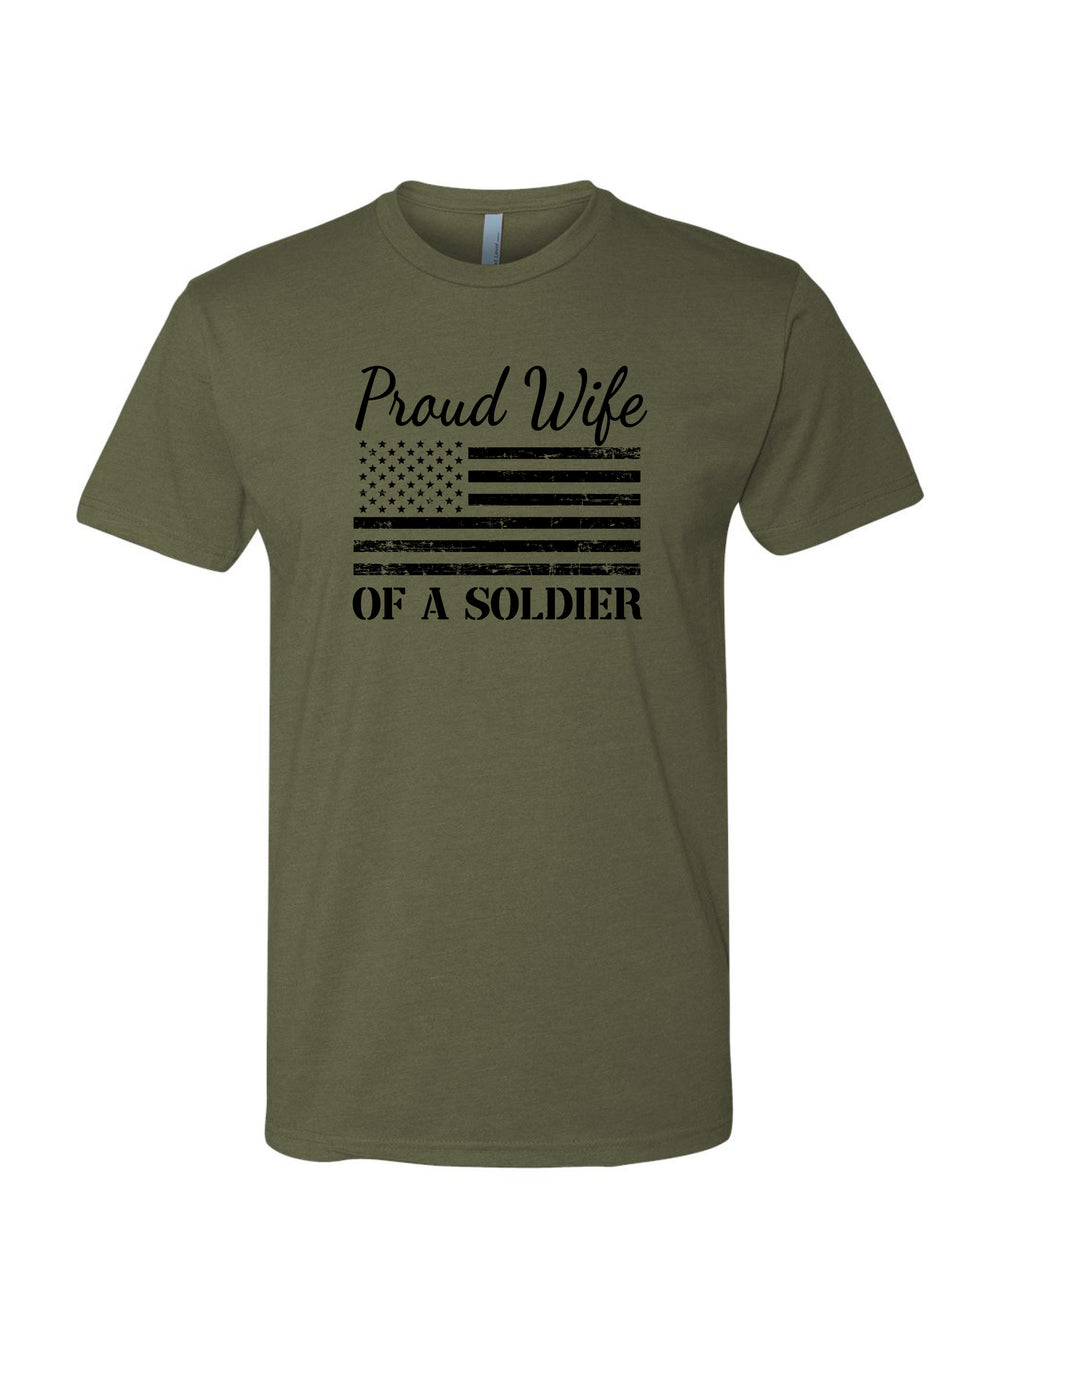 Proud Wife of a Soldier (Military Green)